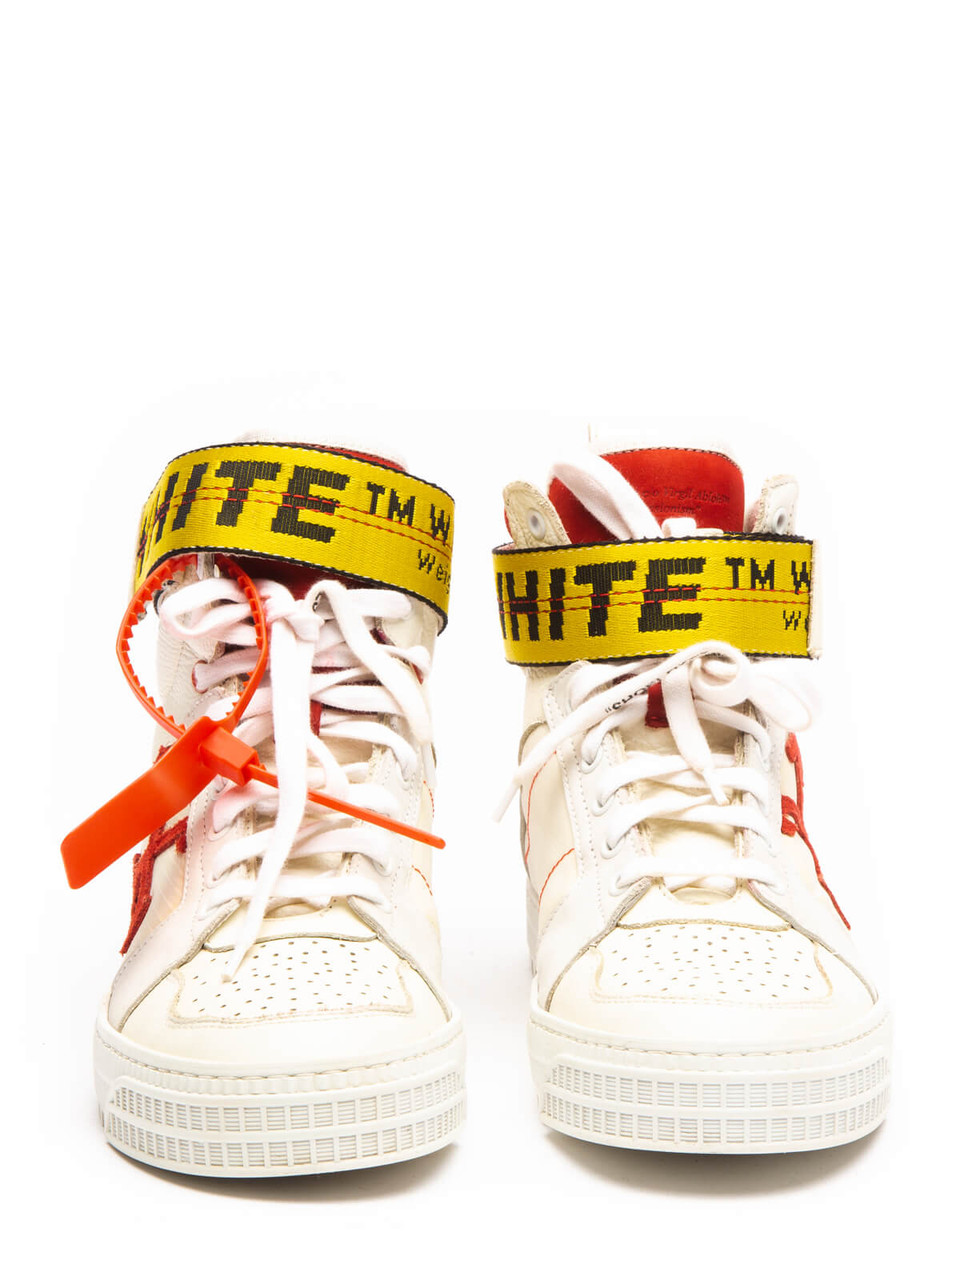 Off-White Women's Industrial Belt Hi-top Sneakers, Size 6 UK, White Leather